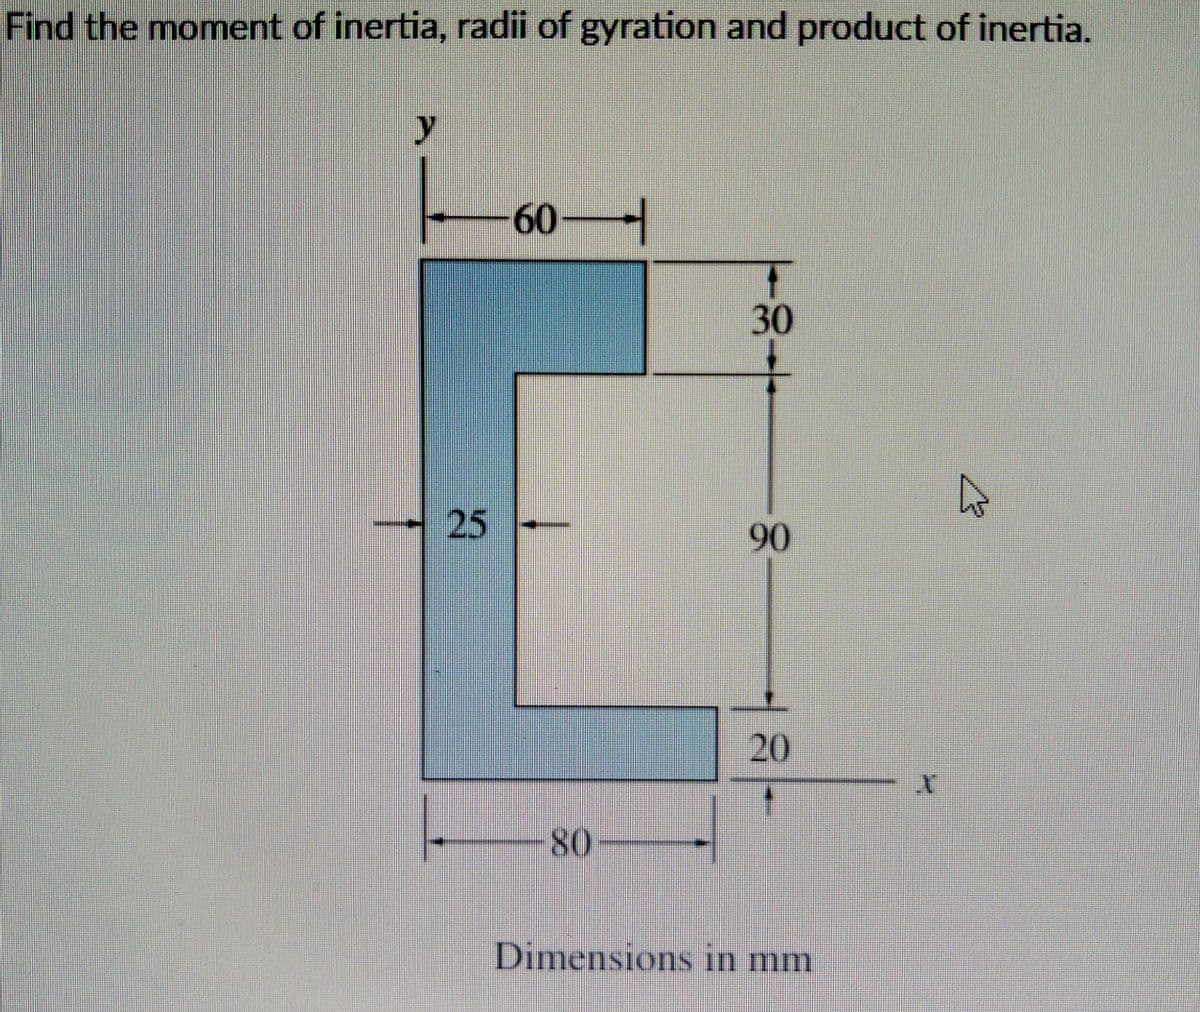 Find the moment of inertia, radii of gyration and product of inertia.
60-
| 20
80
Dimensions in mm
30
90
25
